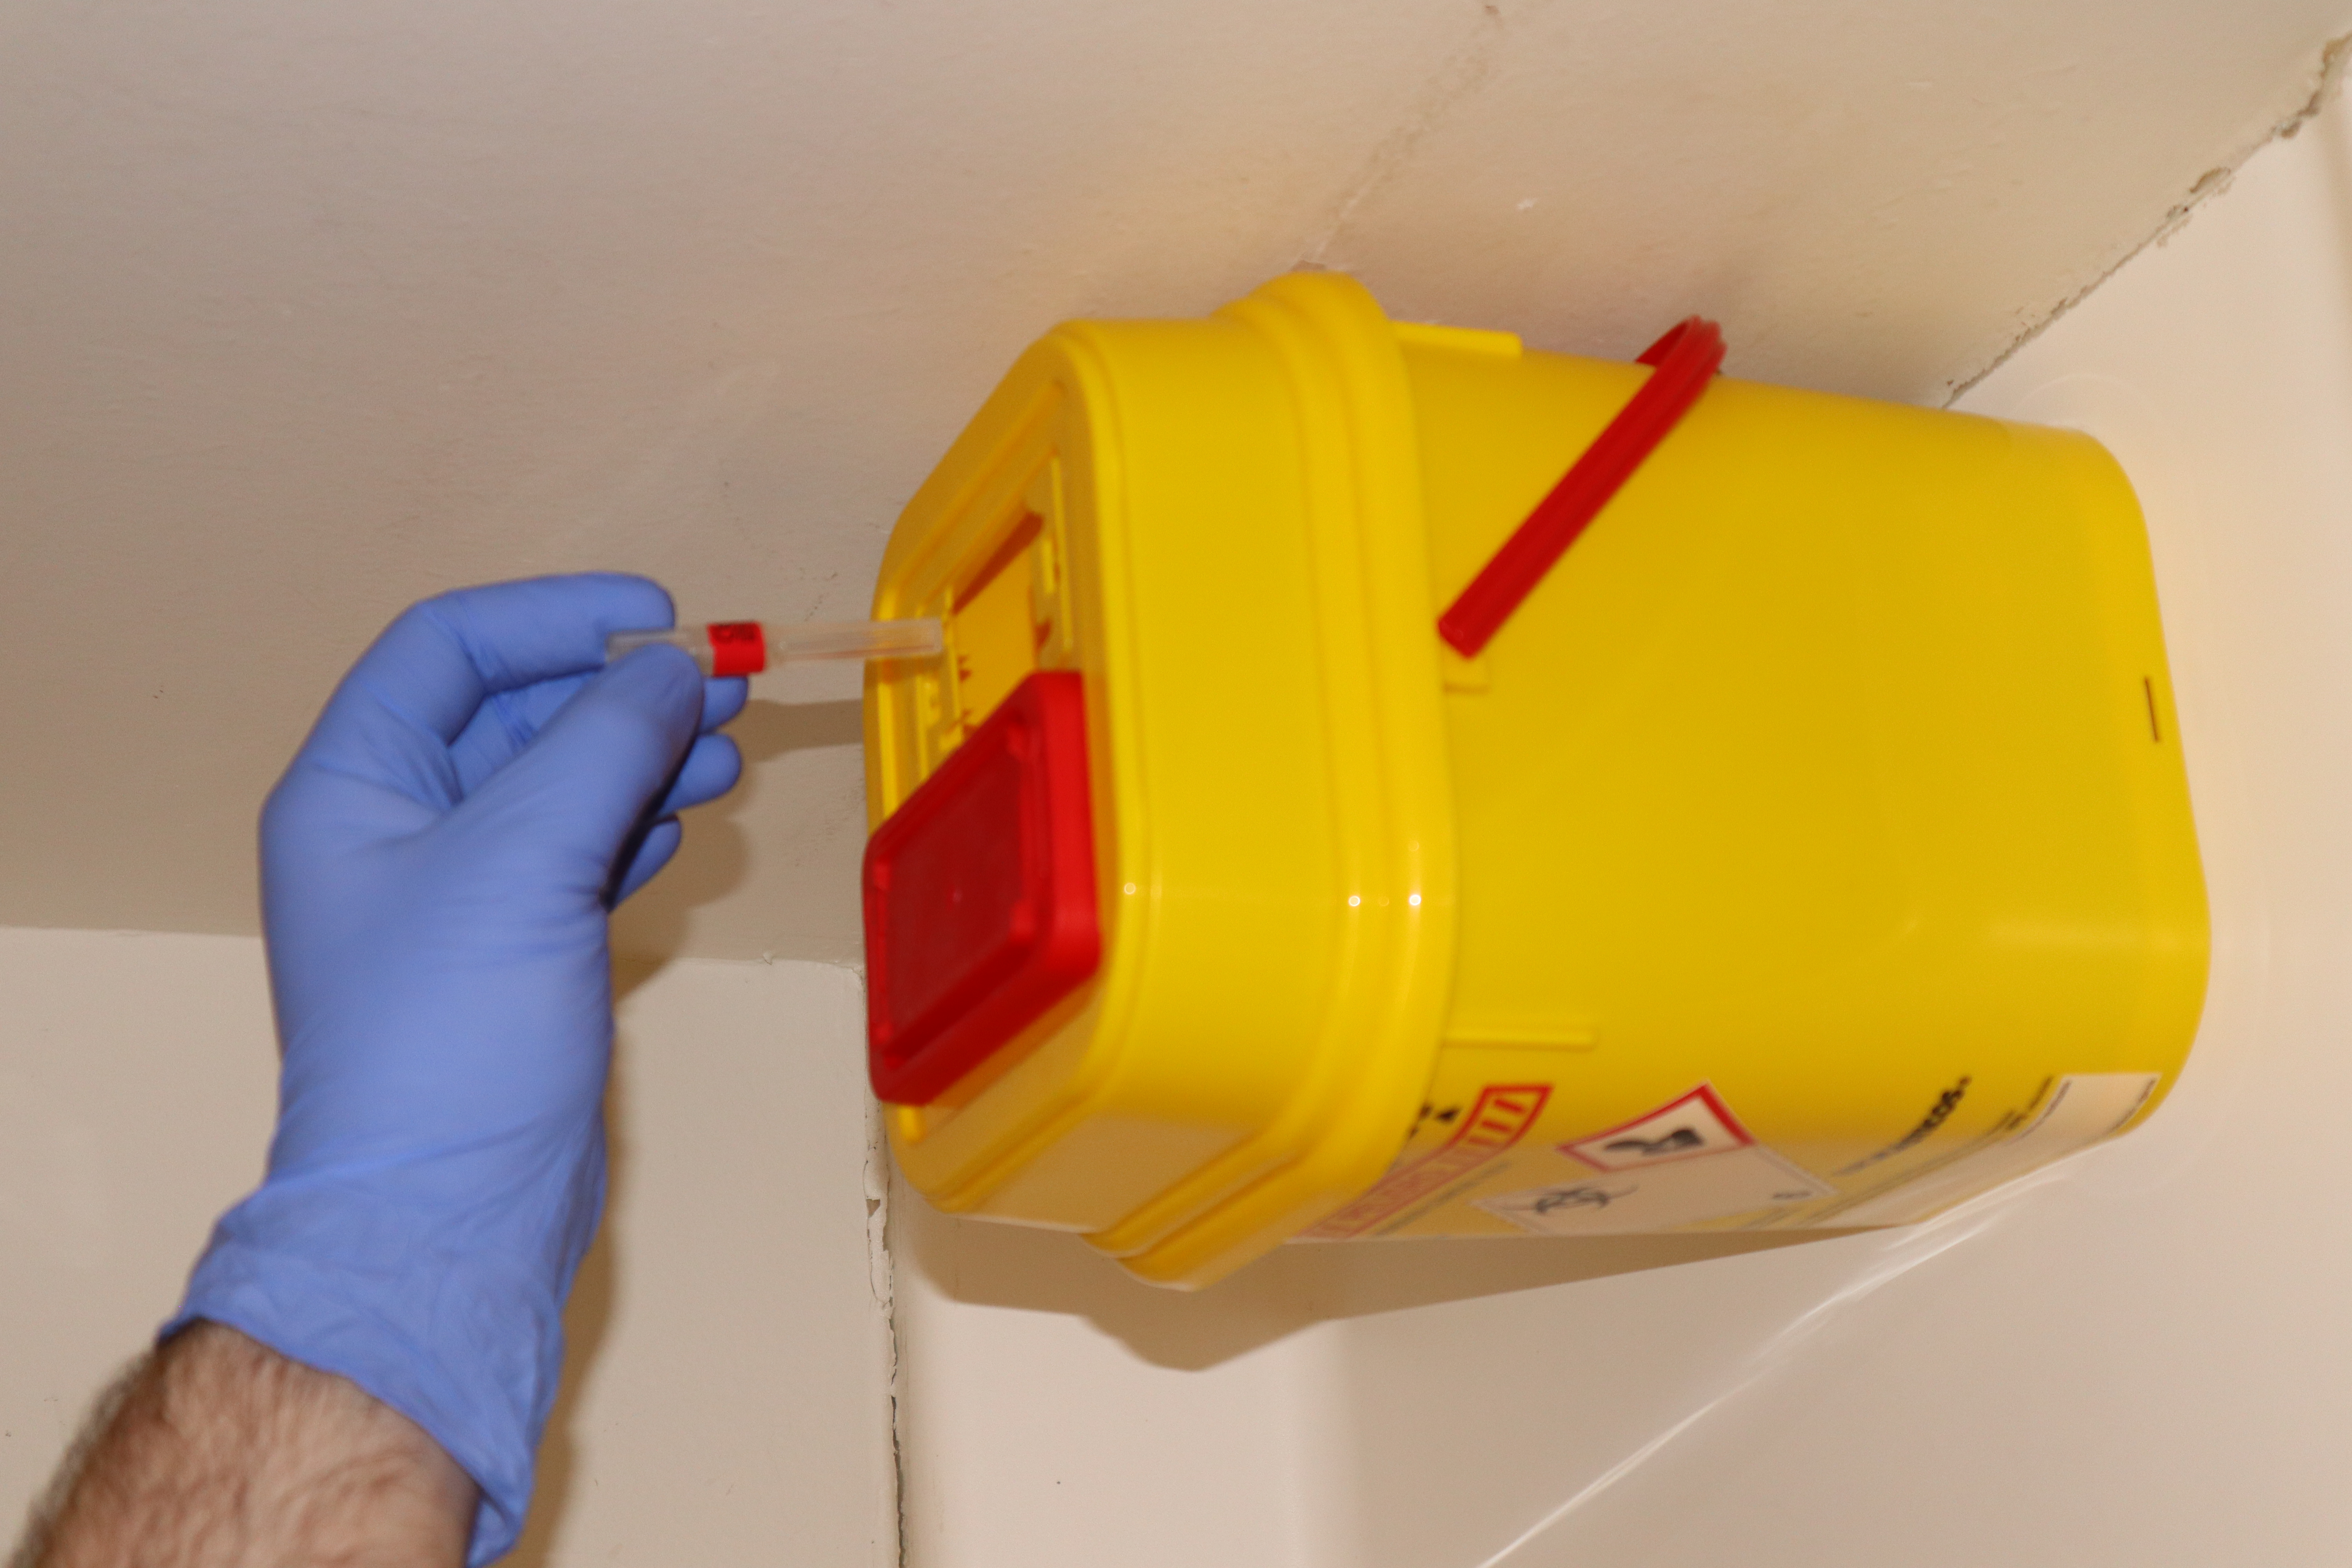 Yellow rigid container for sharps disposal.